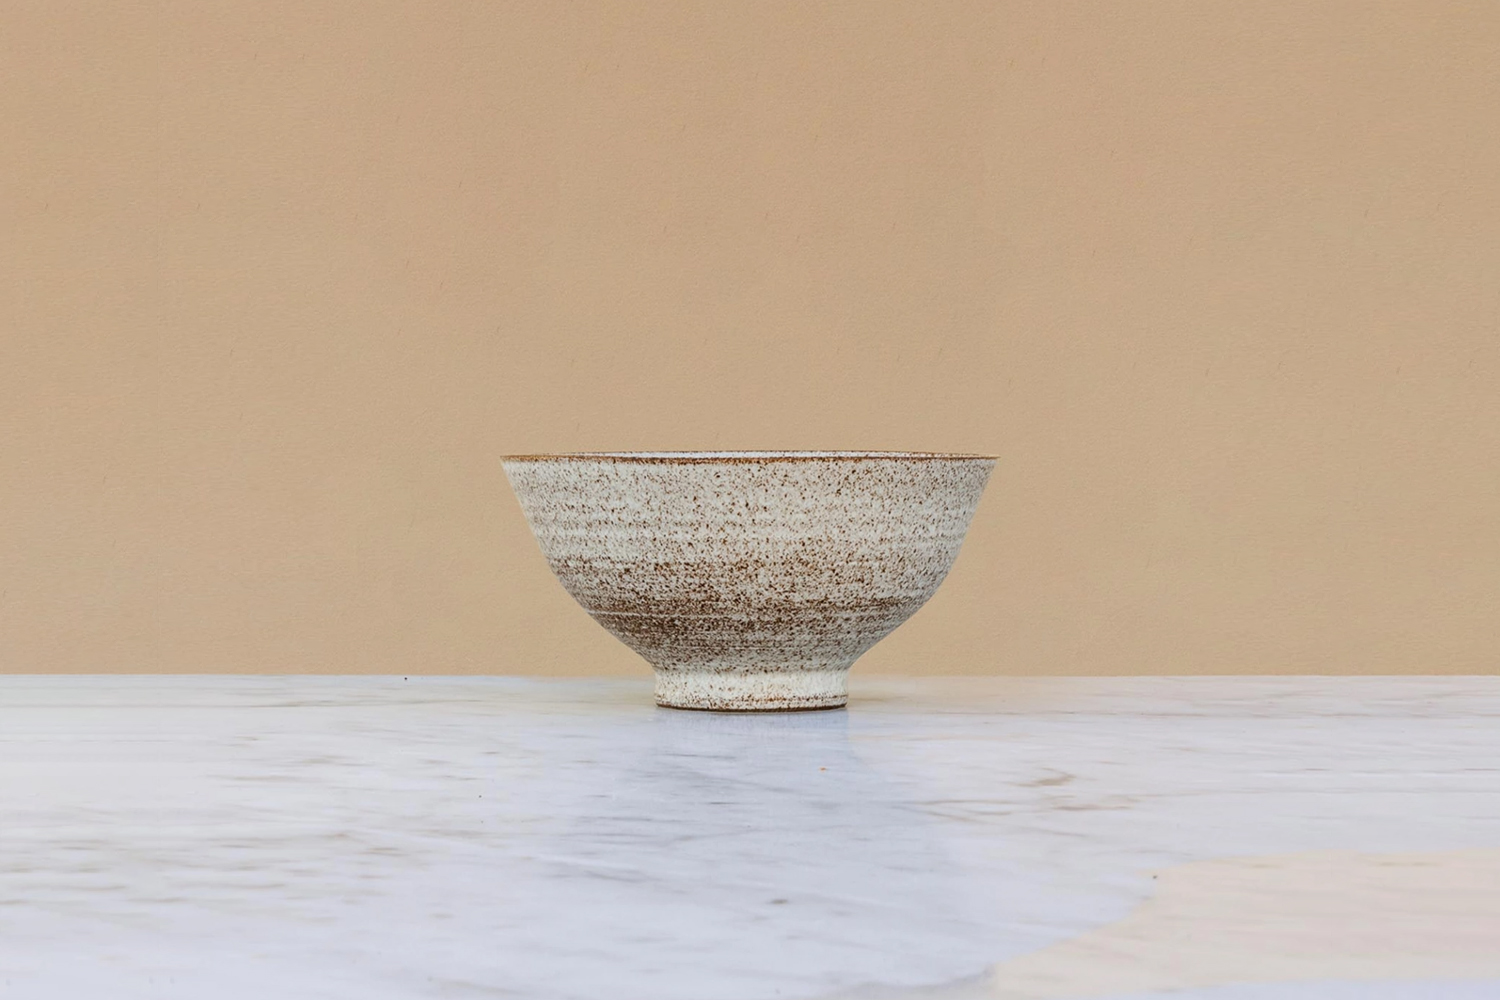 the ingrid unsöld ramen bowl is a hand turned bowl made in stockholm;  19